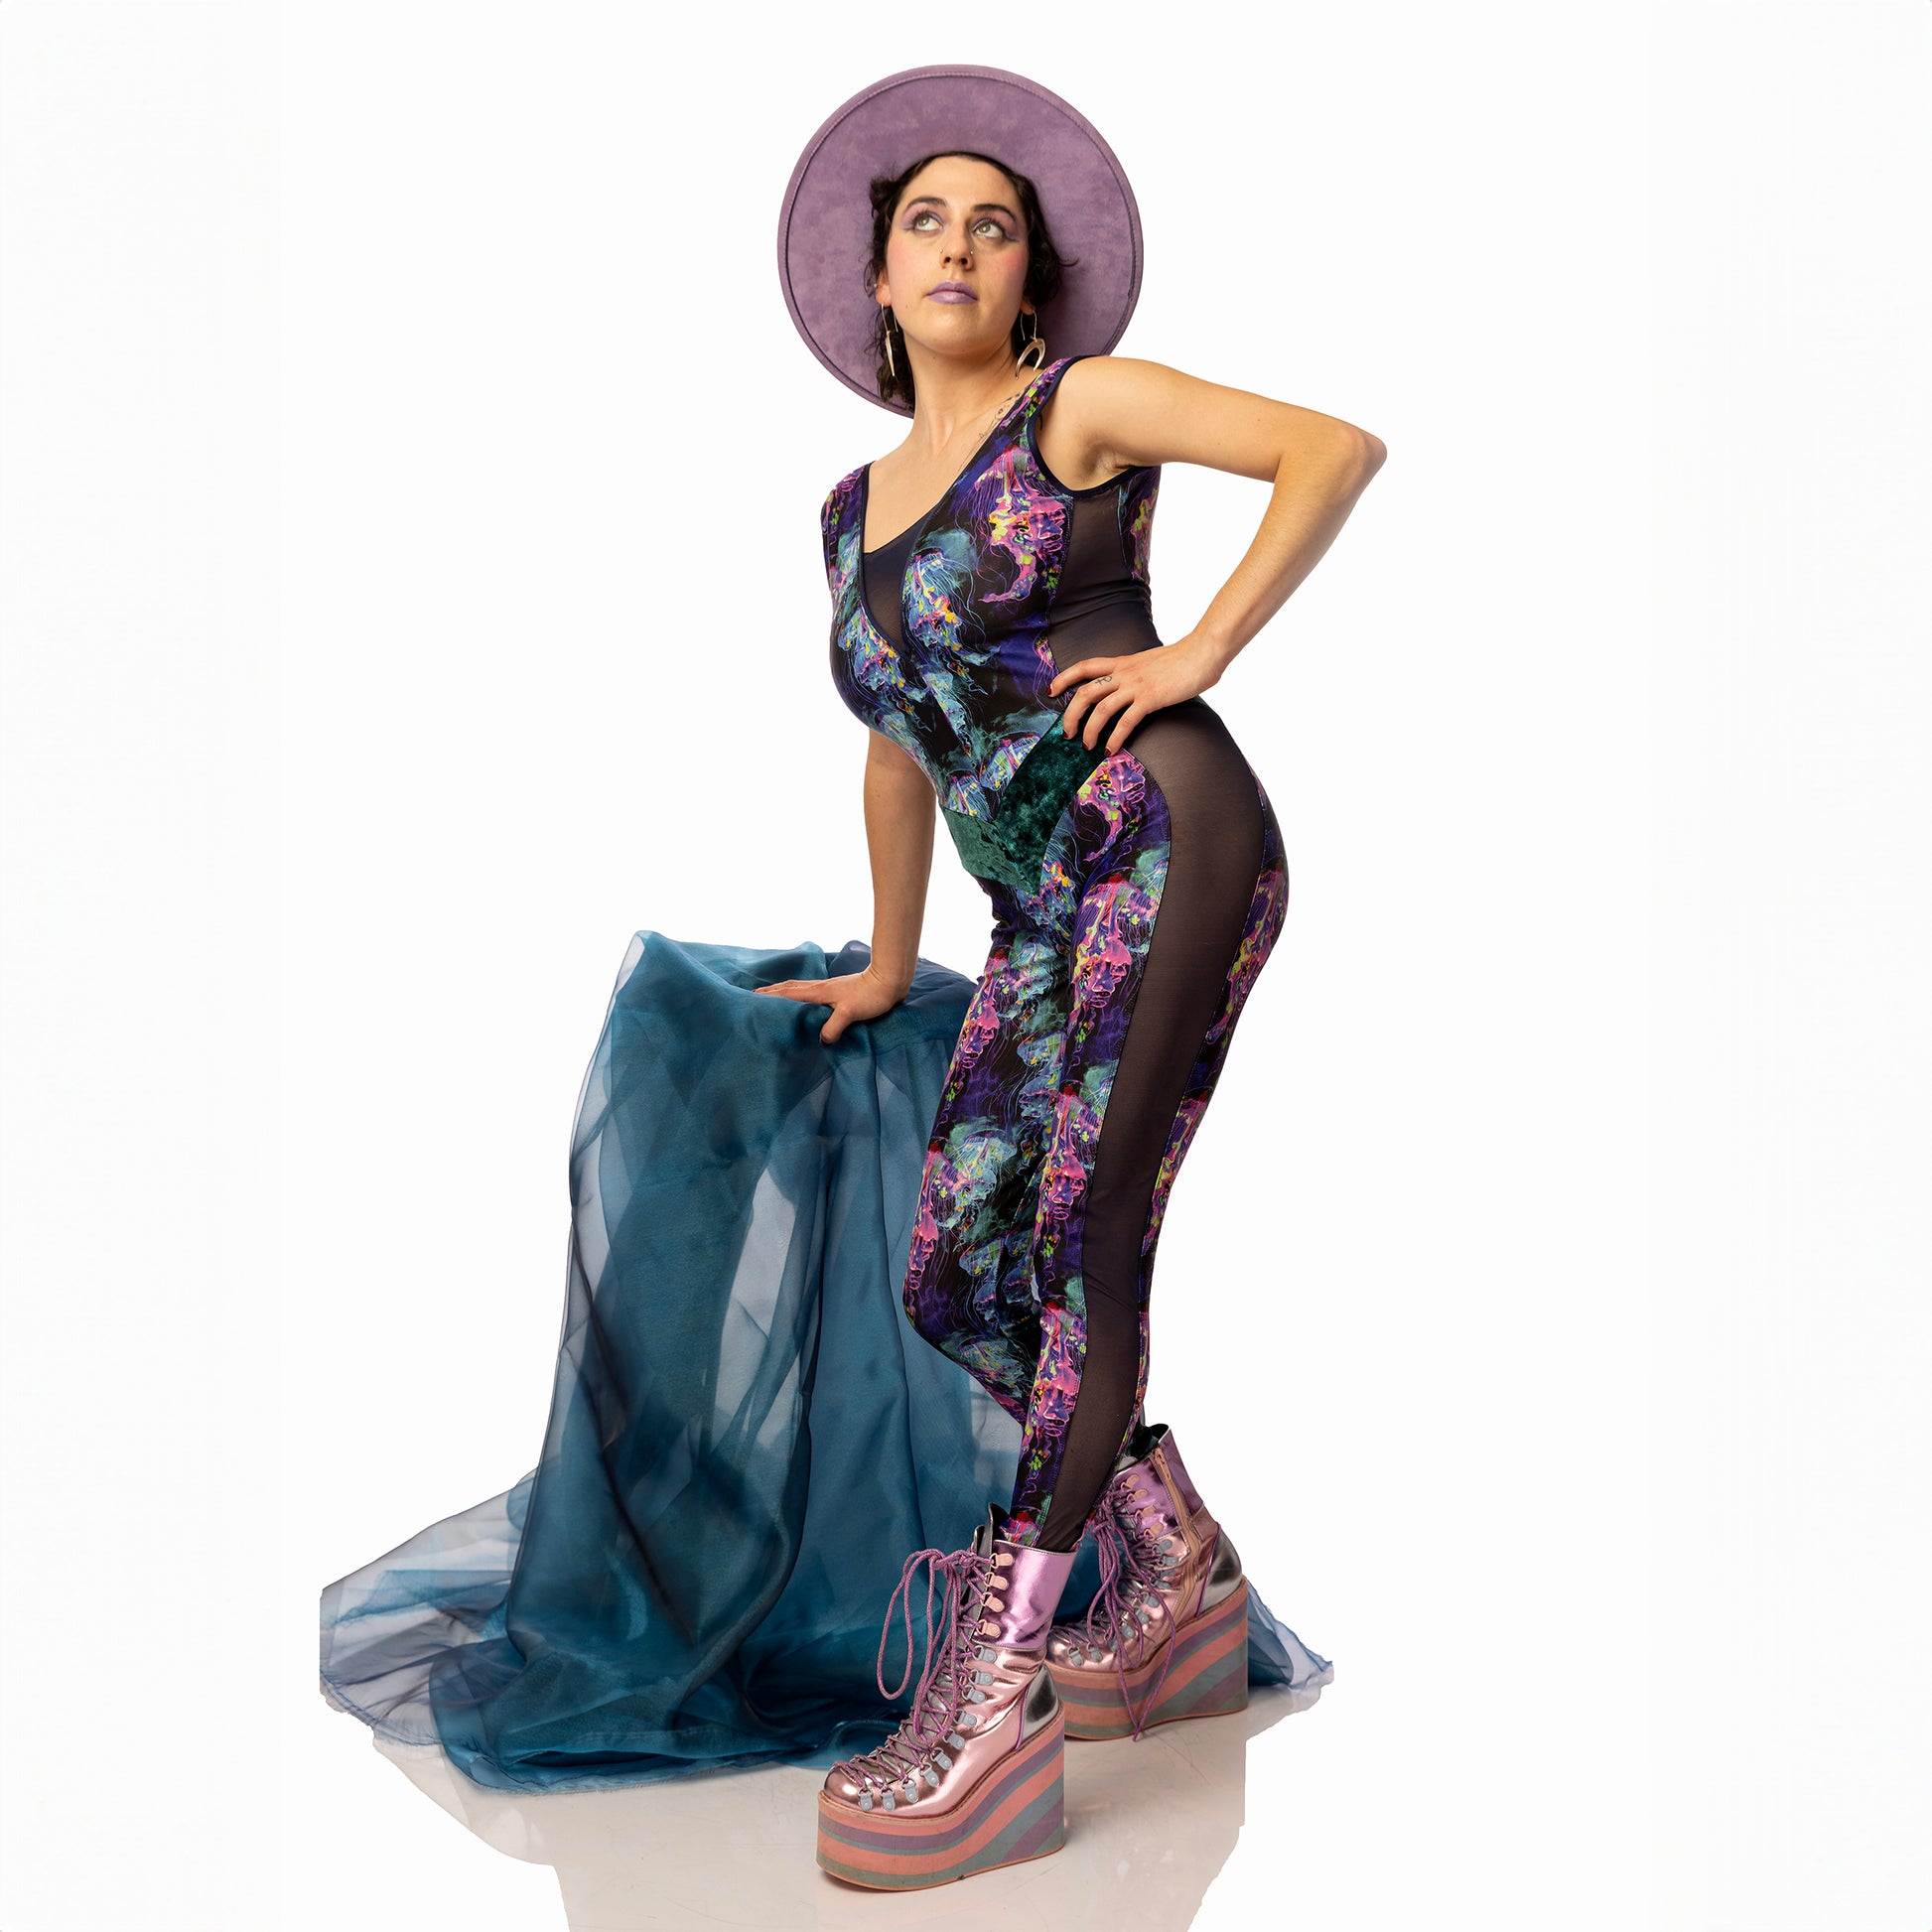 Jellyfish Catsuit, a handmade-to-order piece in purple, black, pink and green tropical jellyfish  printed spandex. This low back catsuit is both stylish and sustainable. The v-neck design features a flattering teal, foiled velvet waist panel and black mesh front insert and side panels.